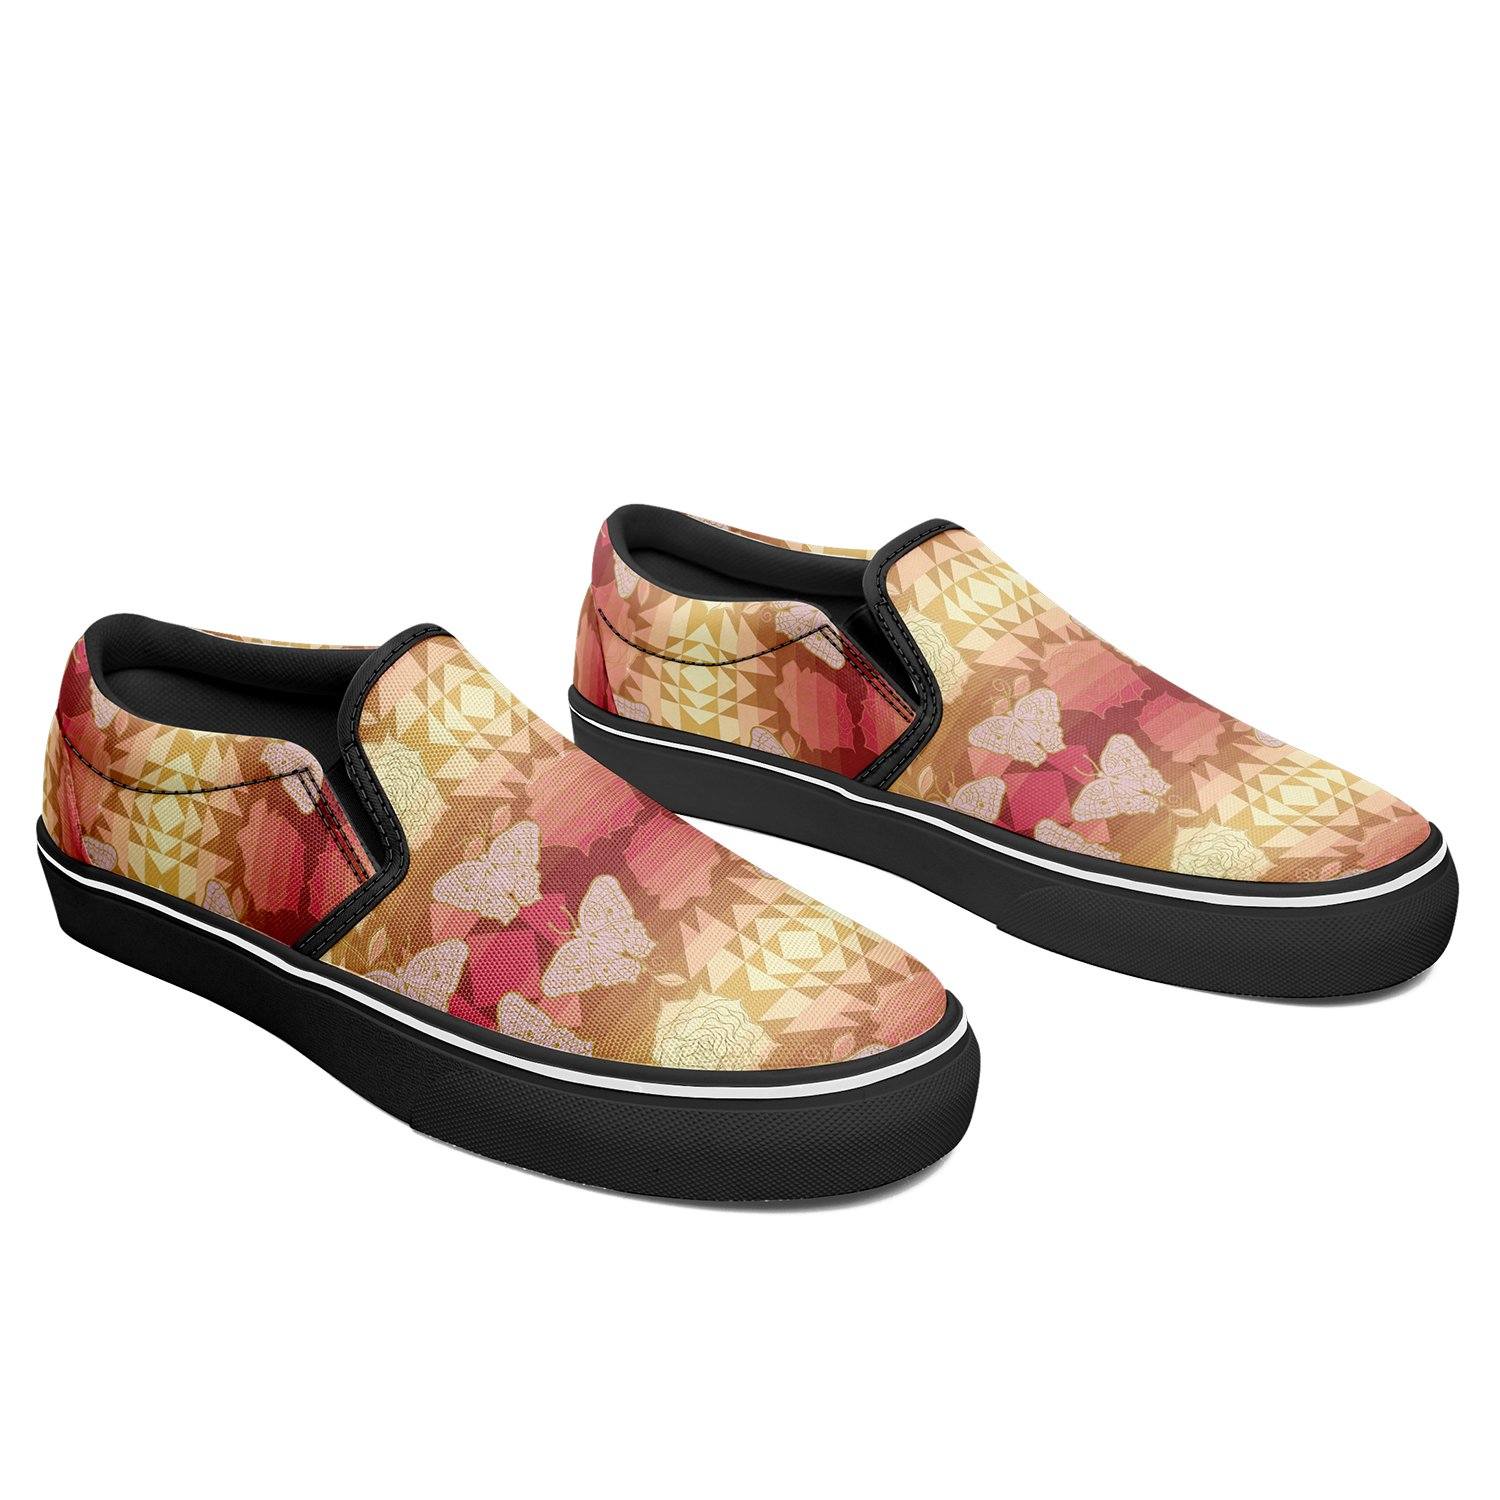 Butterfly and Roses on Geometric Otoyimm Canvas Slip On Shoes otoyimm Herman 